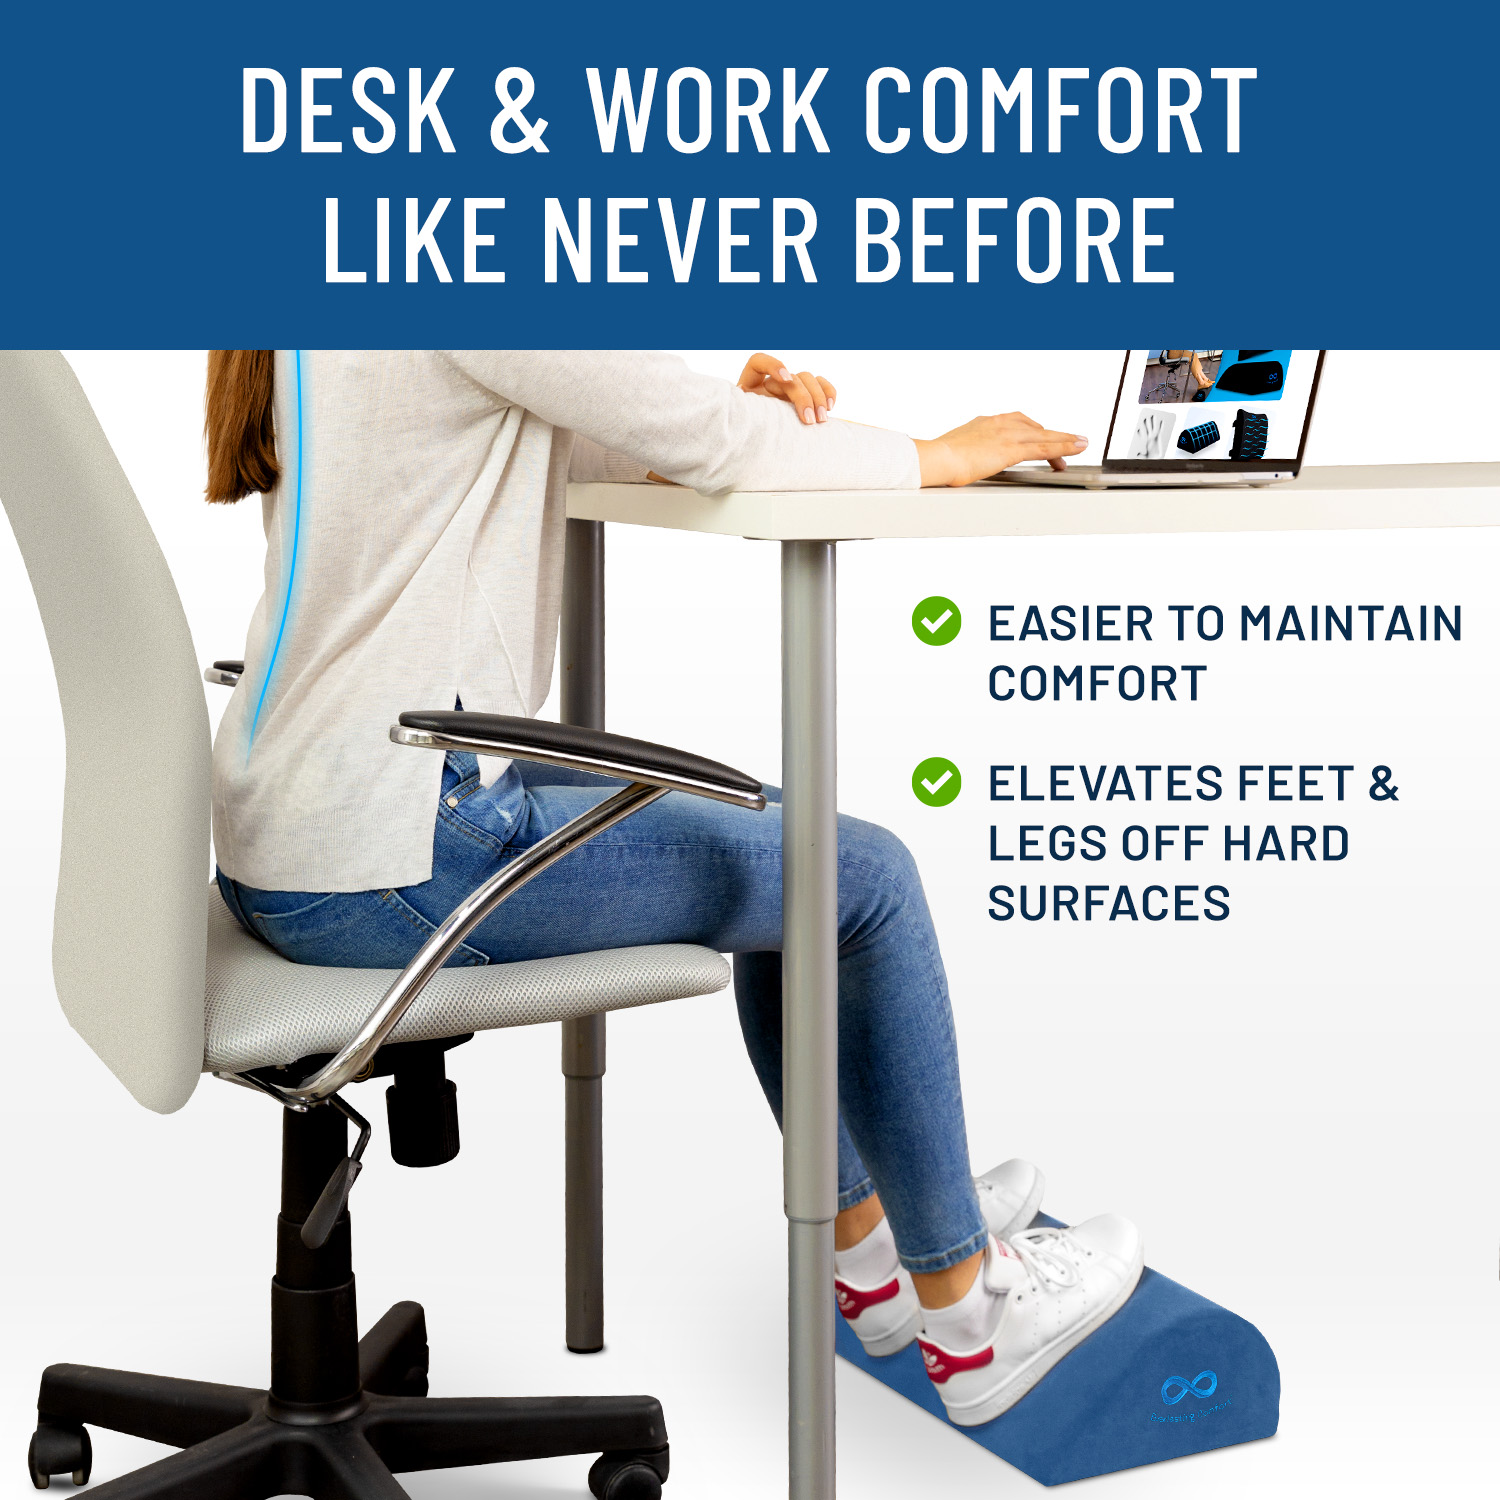 Everlasting Comfort Foot Rest for Under Desk - Kick up Your feet, Improve Circulation, Work from Home Memory Foam Footrest Pillow, Foot Stool for Office, Home, Gaming, Computer Accessories (Navy Blue) - image 5 of 9